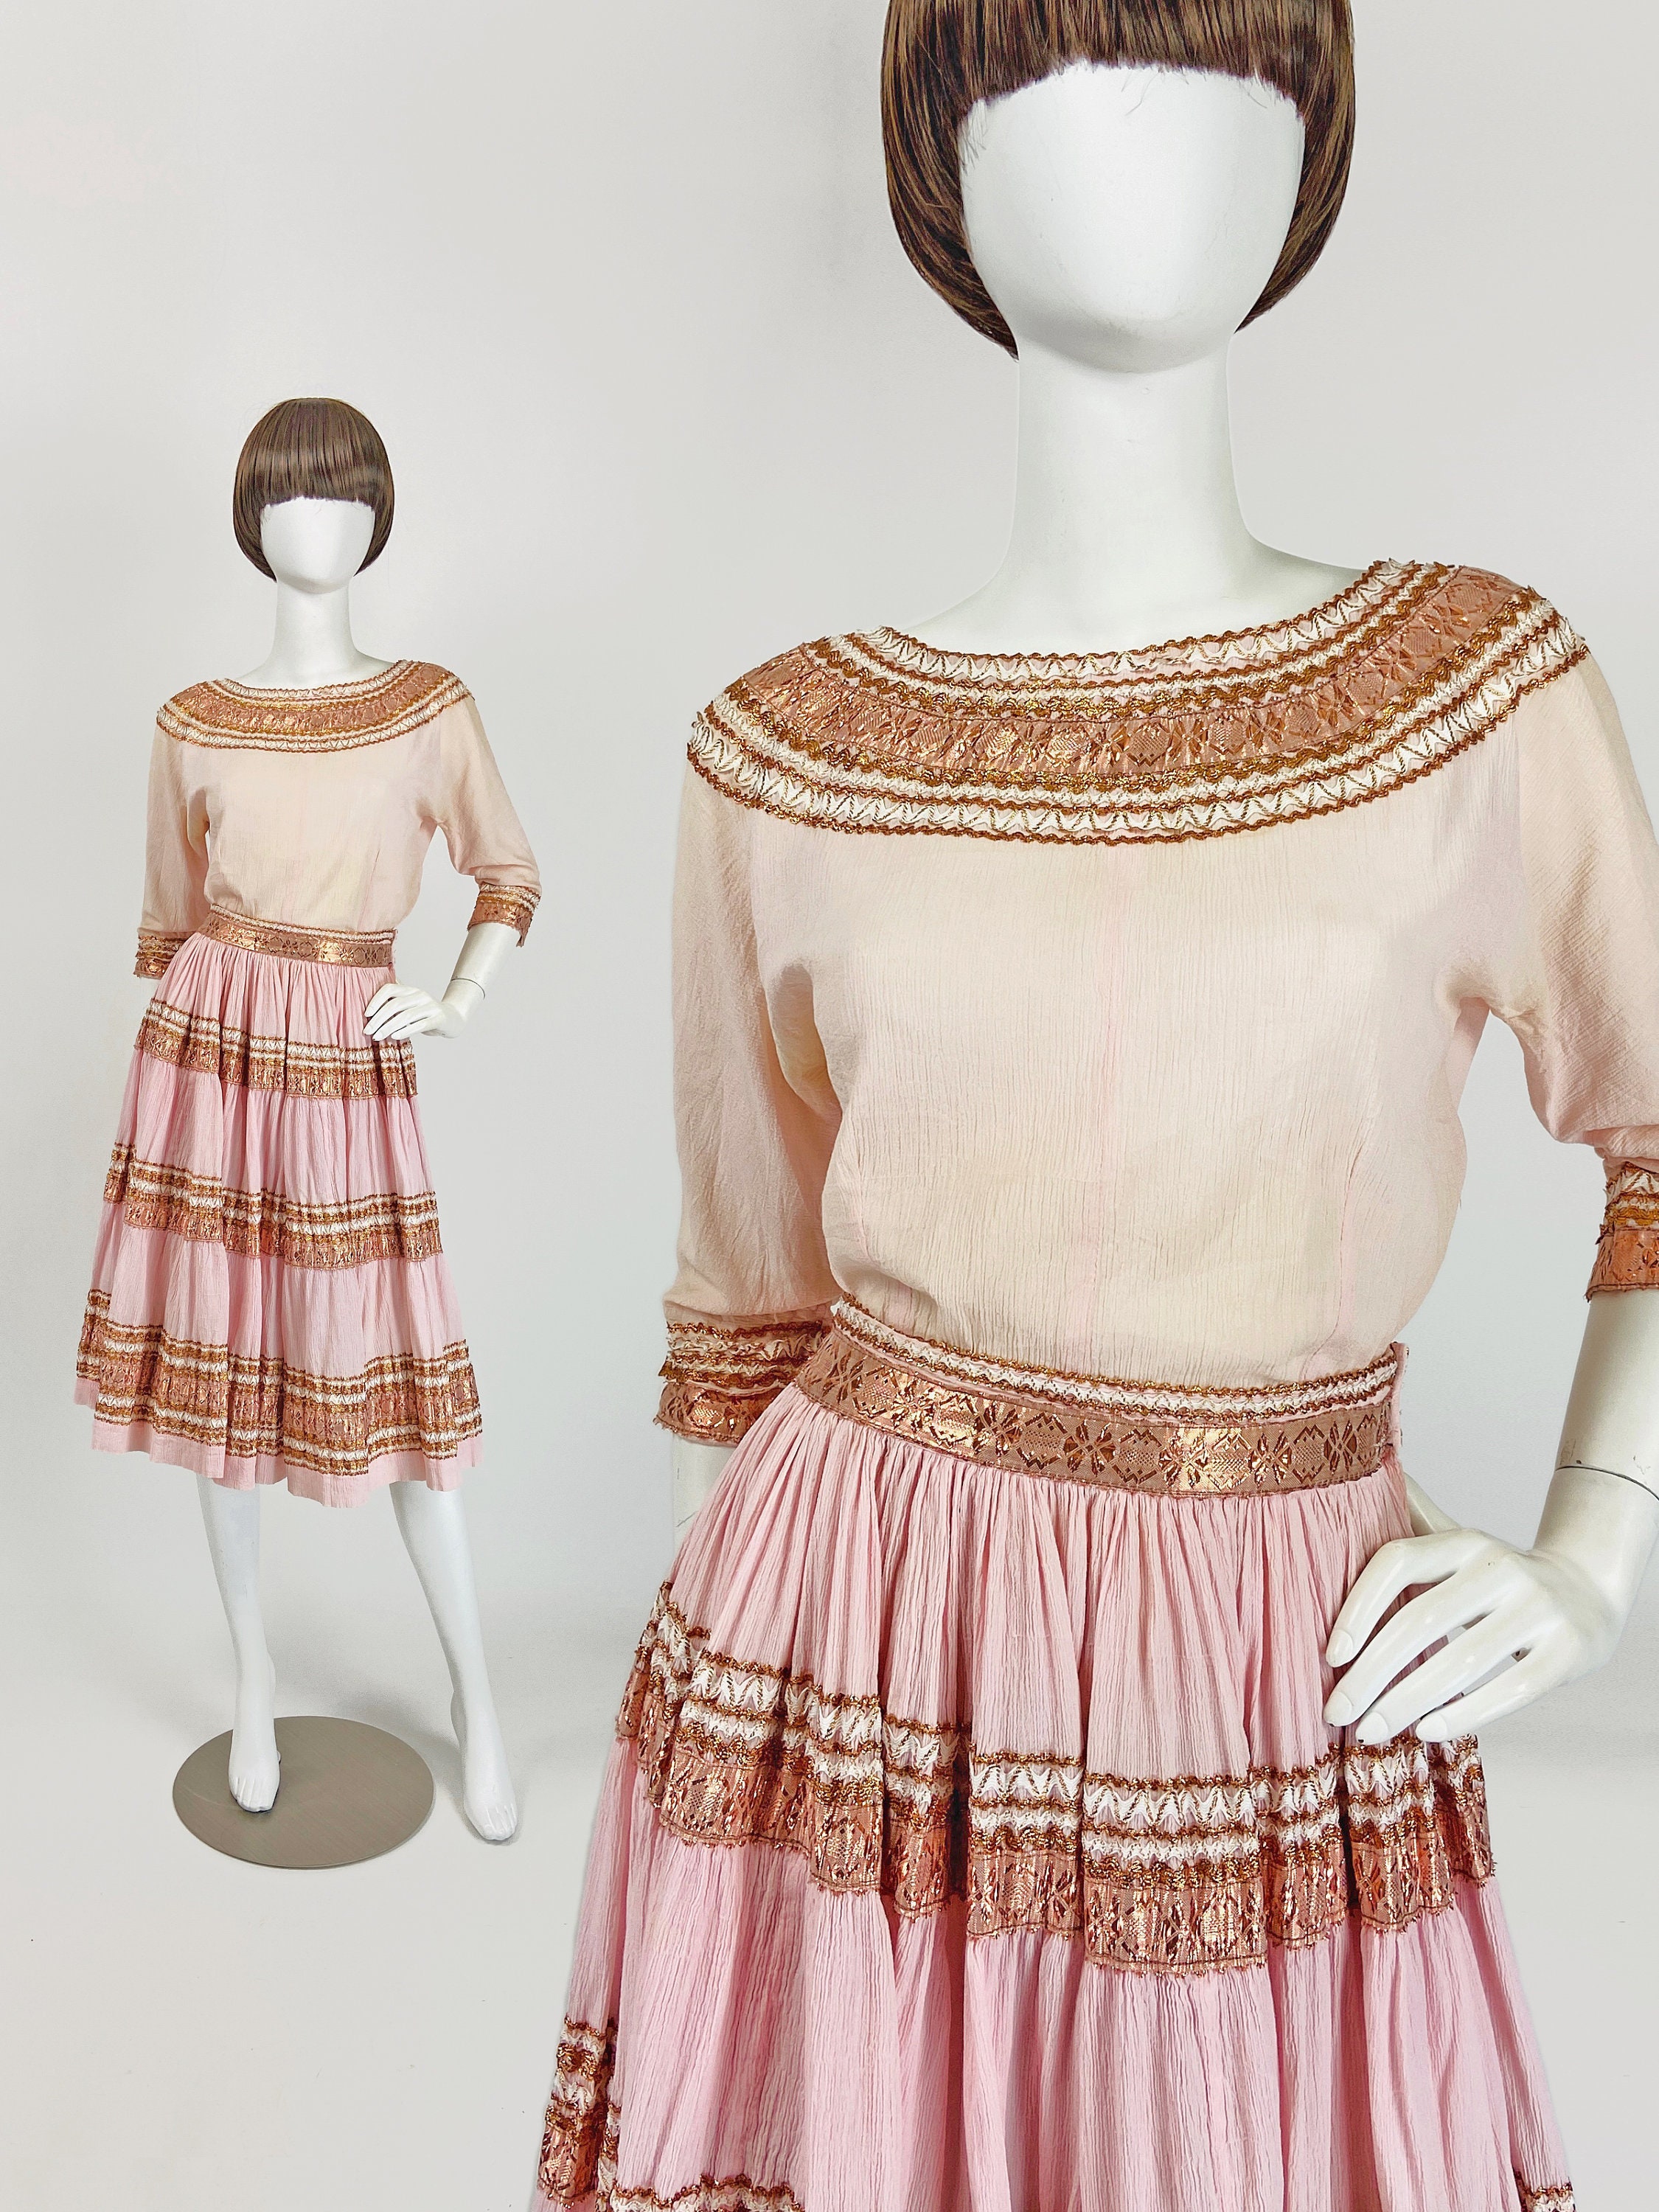 Vintage 50S Skirt Set, Patio Skirt, Rockabilly Clothing, Peasant Embroidered Metallic Top, Xs Small Size 2 4 Us, 6 8 Uk P456